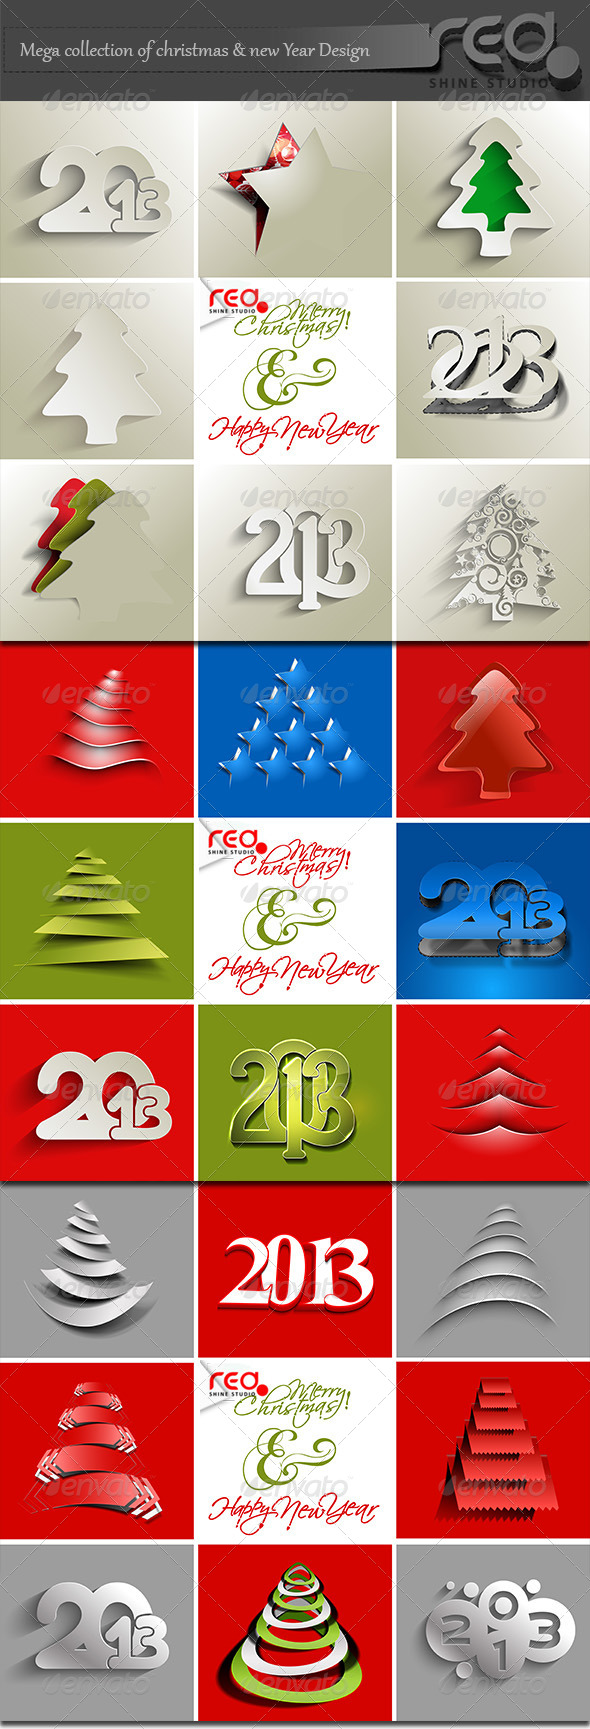 Mega Collection of Christmas & New Year Design.